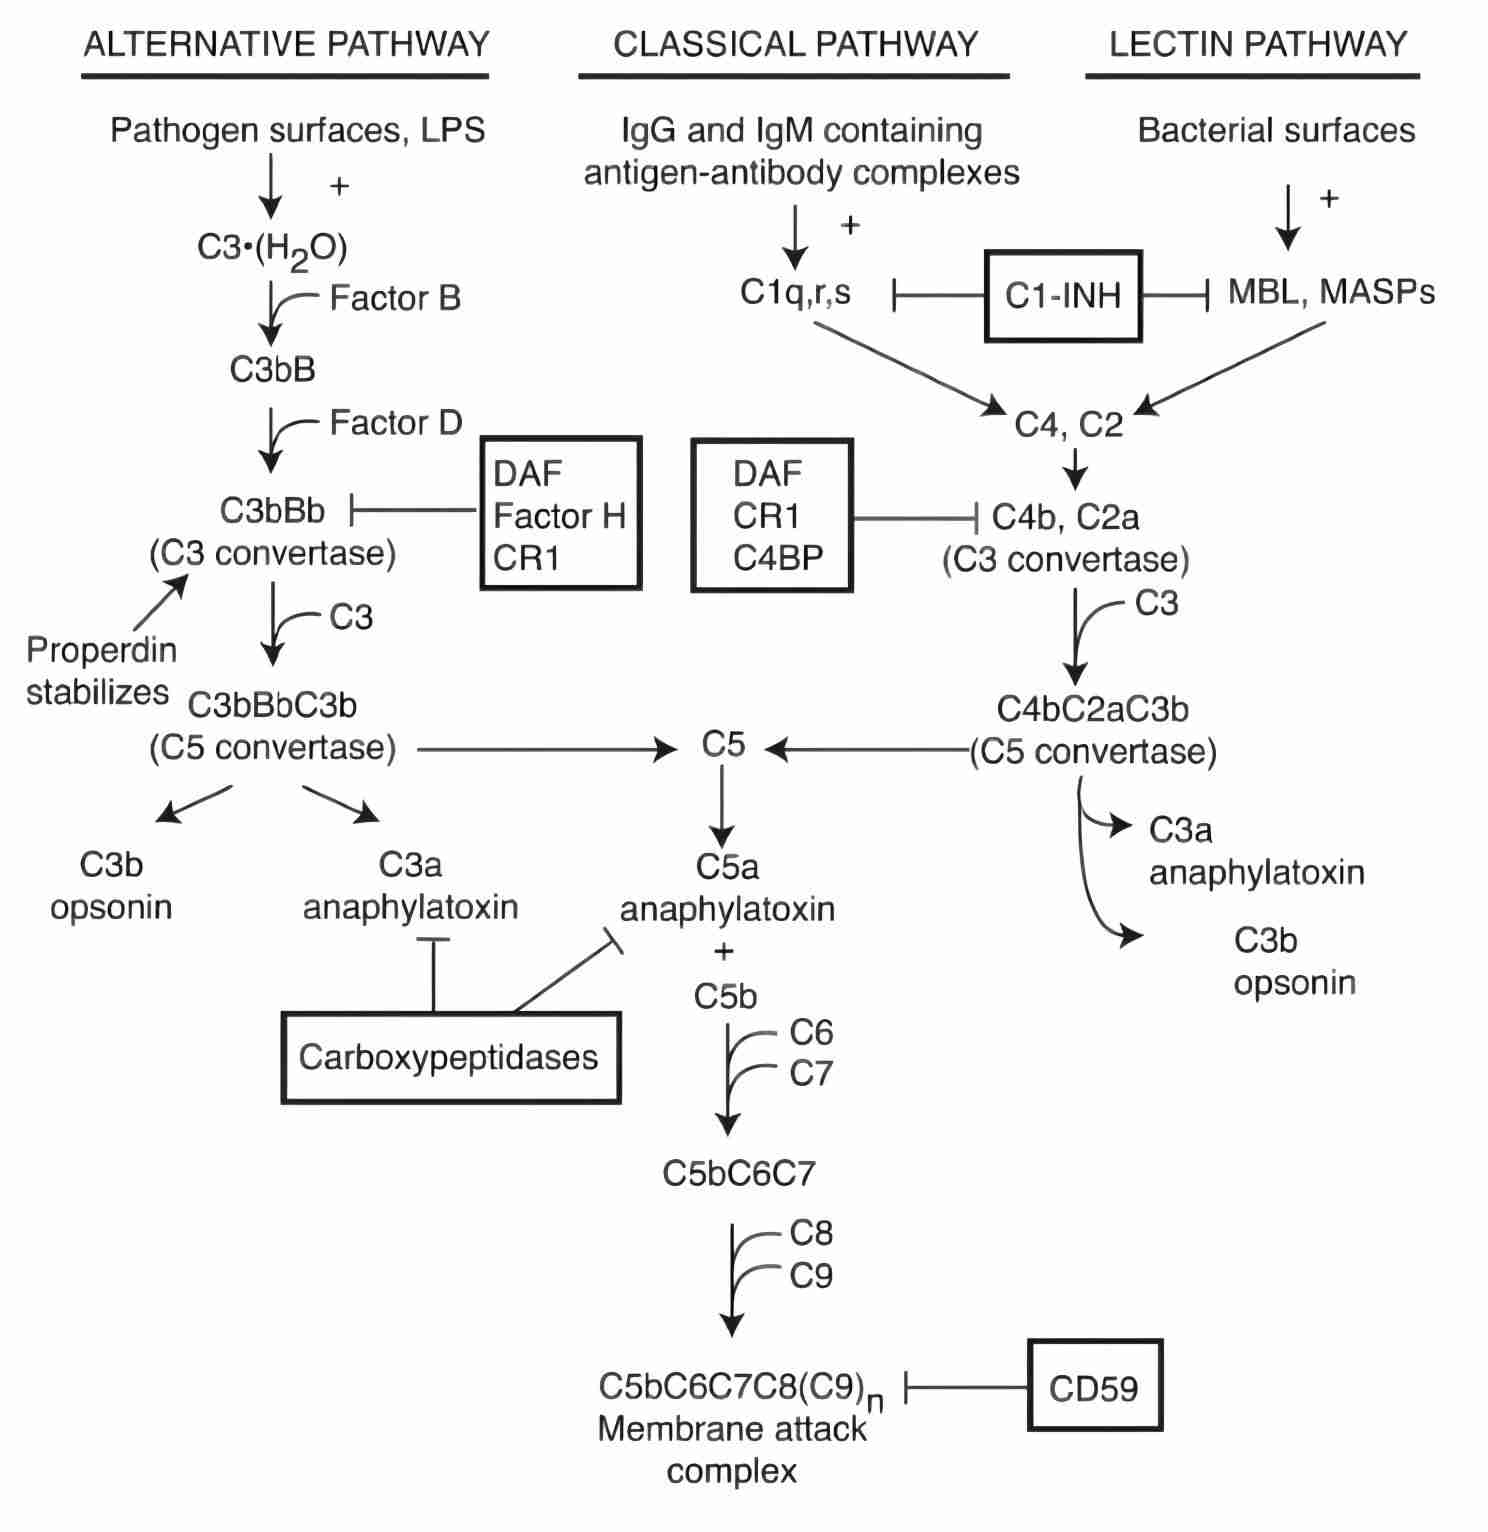 The pathways of complement activation: alternative, classical and lectin pathways.